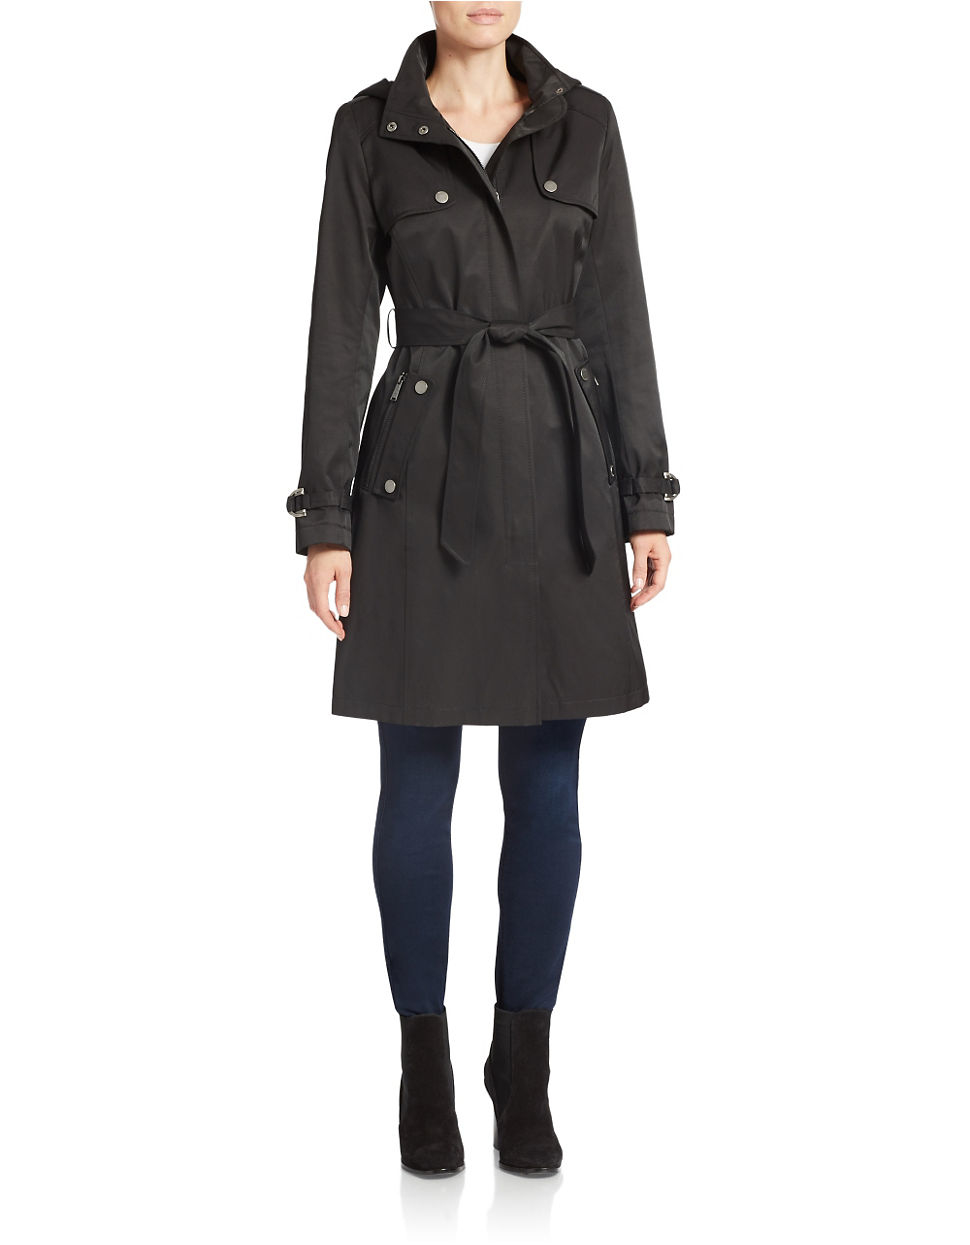 Dkny Belted Trench Coat in Black | Lyst